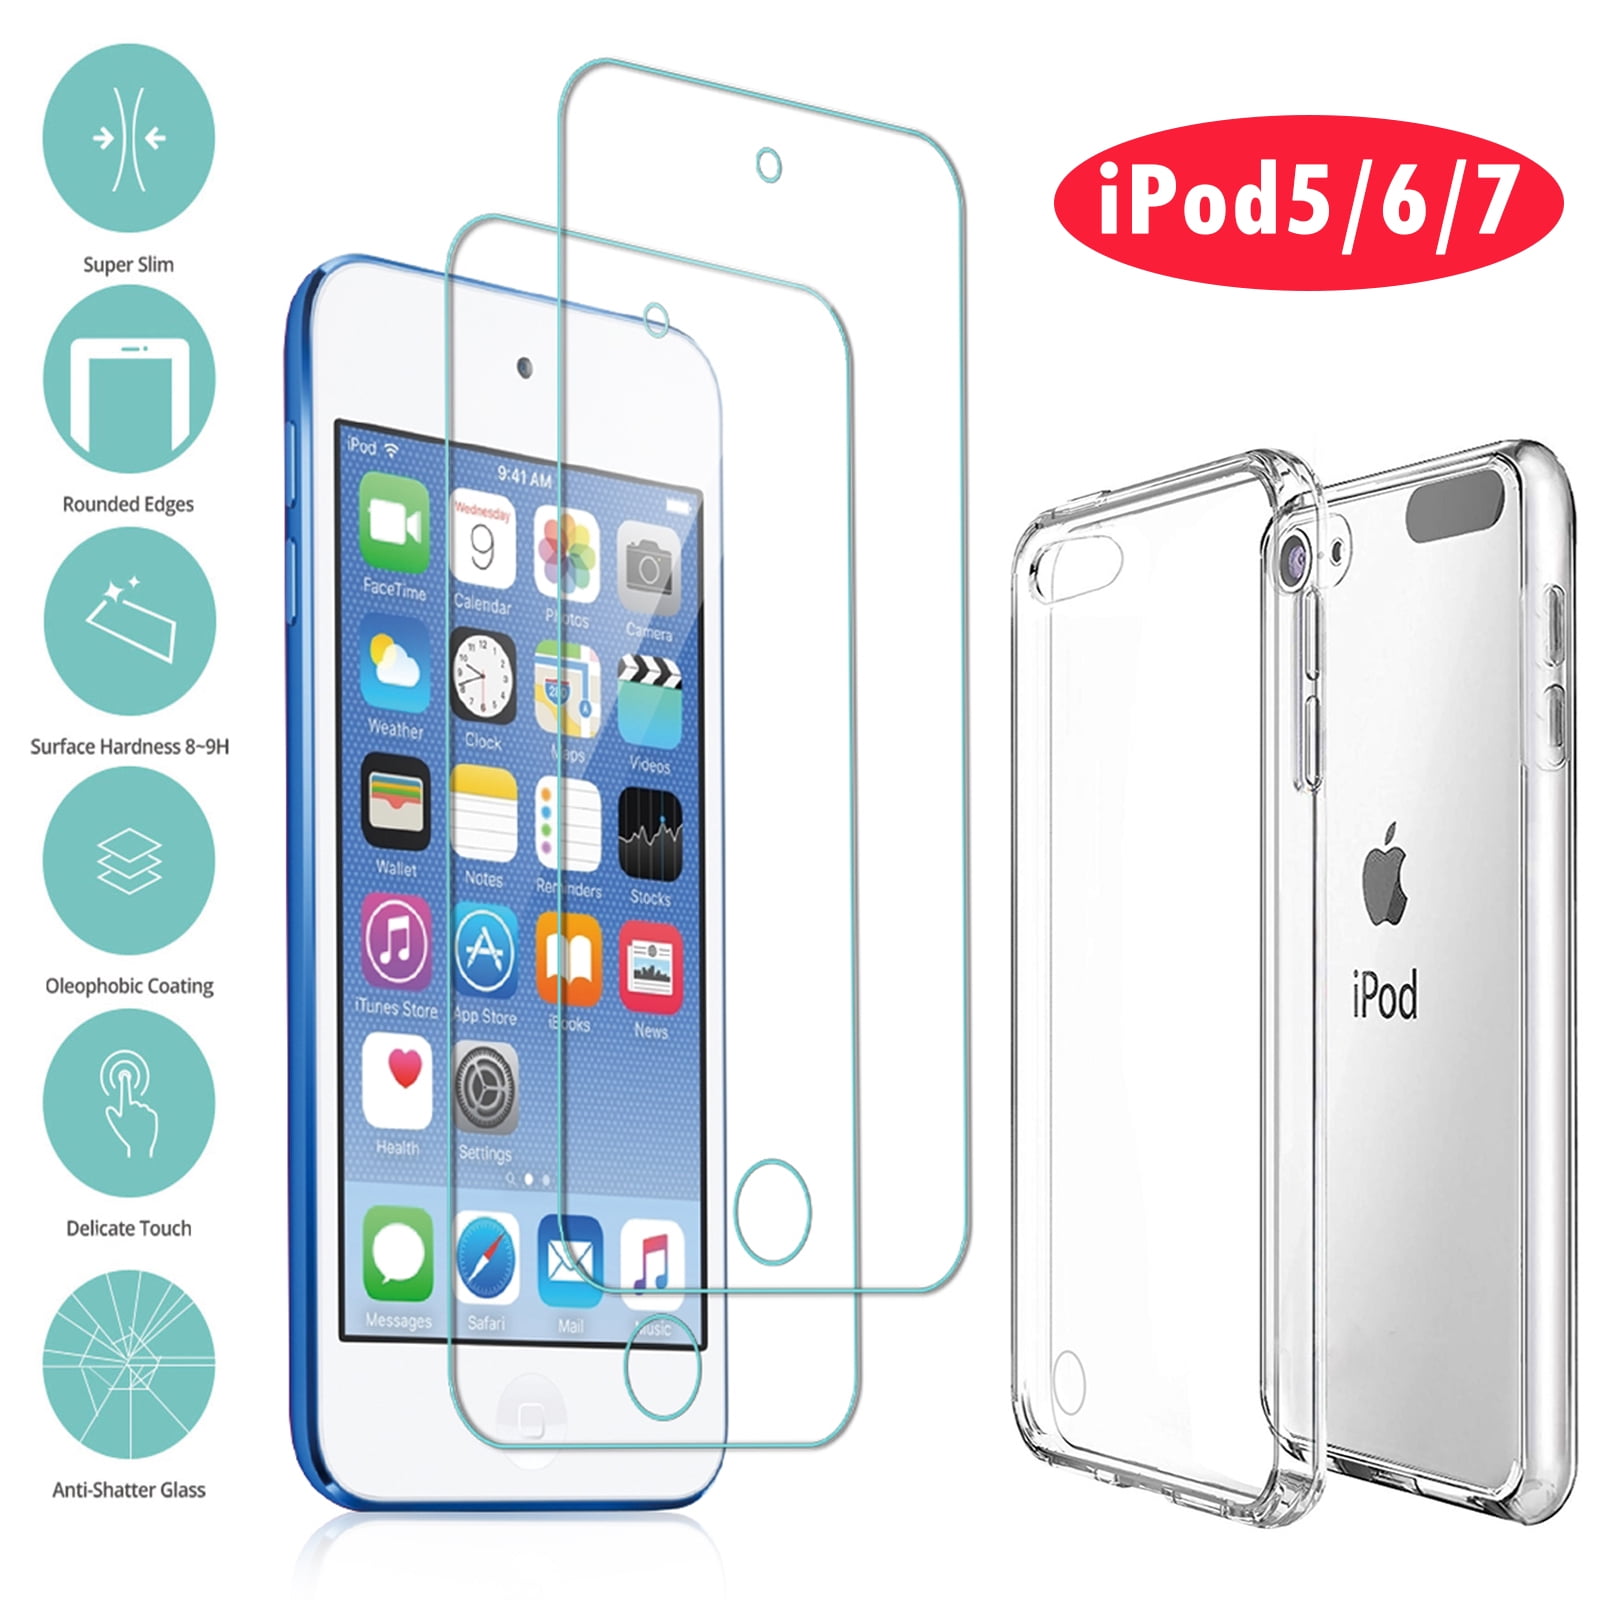 iPod Touch 7th Generation Case HD Clear-Black IDWELL Touch 6 Touch 5 Case with 2 Screen Protectors Clear Slim Soft TPU Black Bumper Case for Apple iPod Touch 7G 2019 Released/6G 2015 Released/5G 